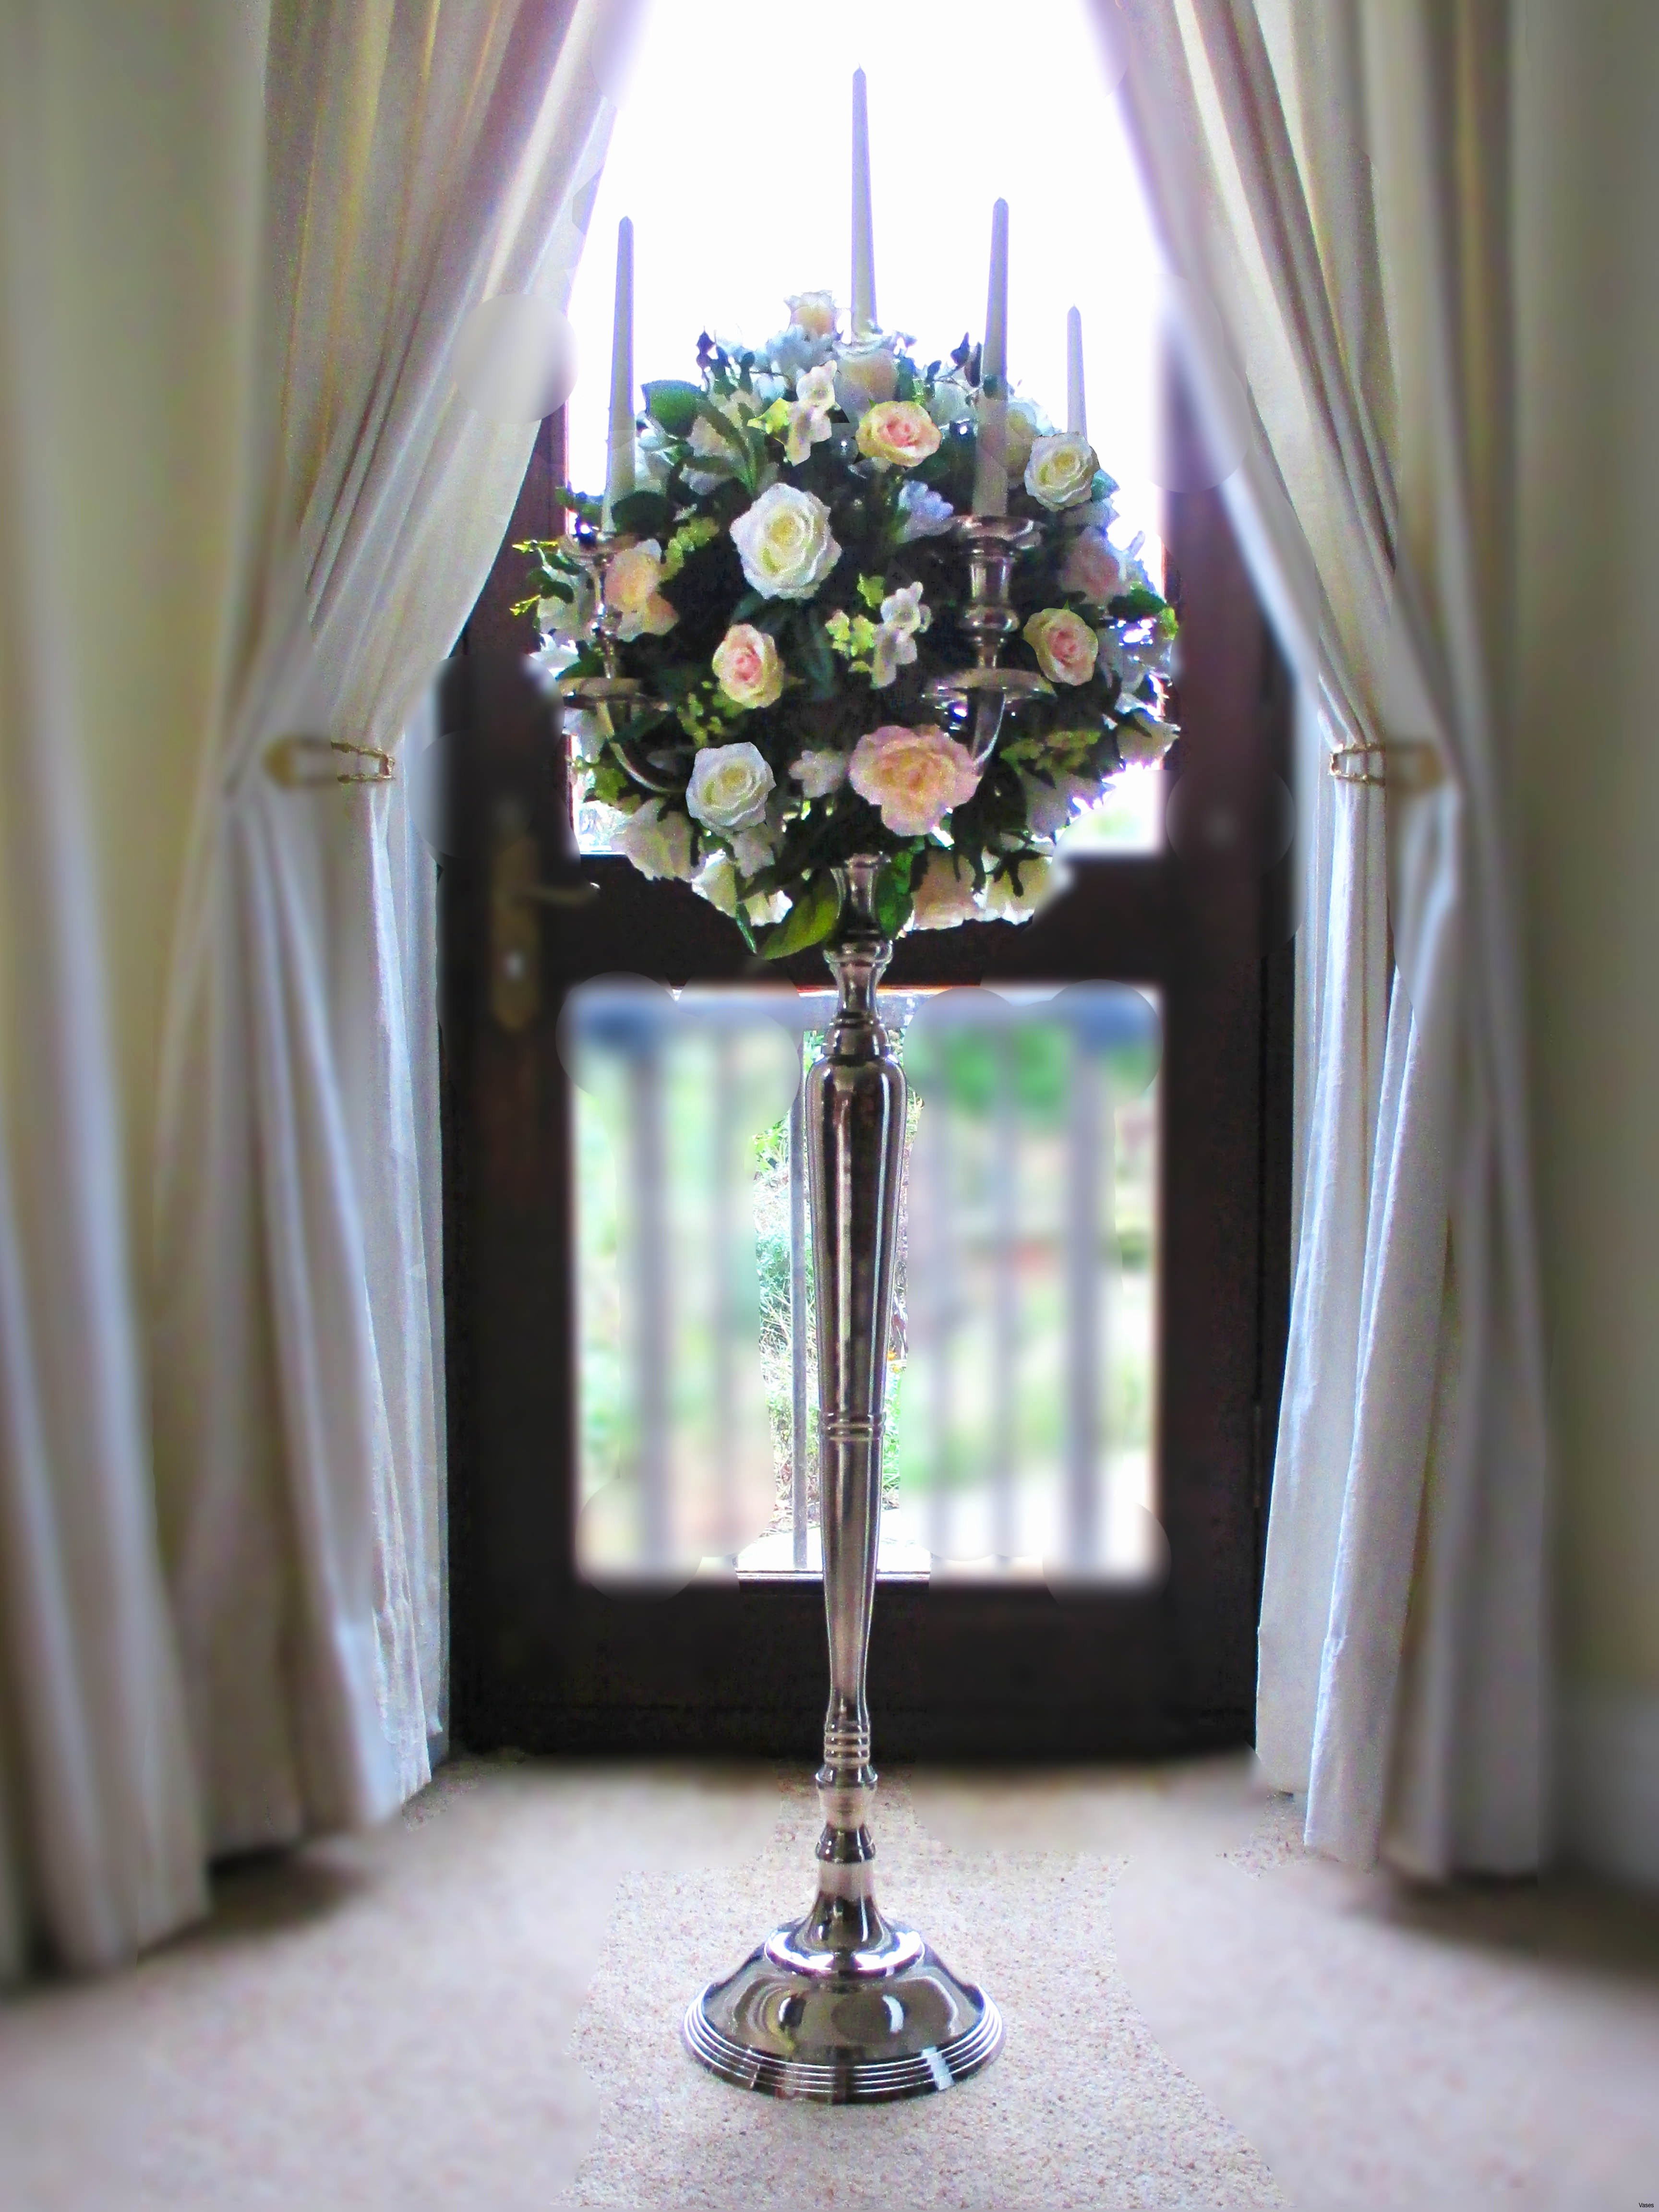 long low vase of how to budget a wedding fresh wedding wedding a bud luxury mirrored pertaining to how to budget a wedding inspirational cheap wedding bouquets packages 5397h vases silver vase leeds i